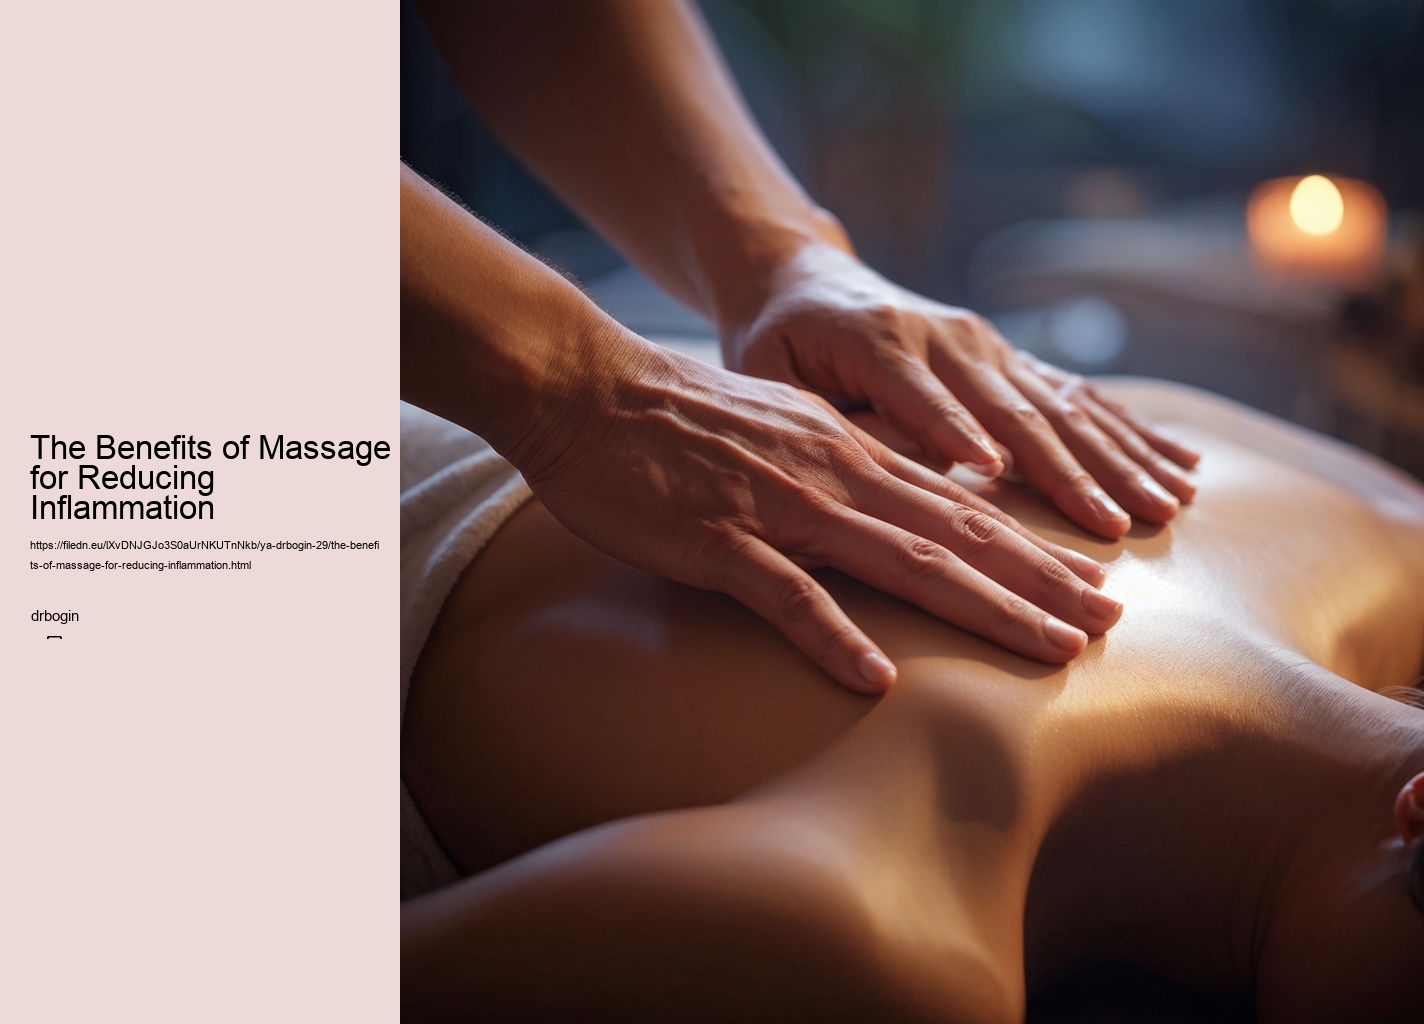 The Benefits of Massage for Reducing Inflammation